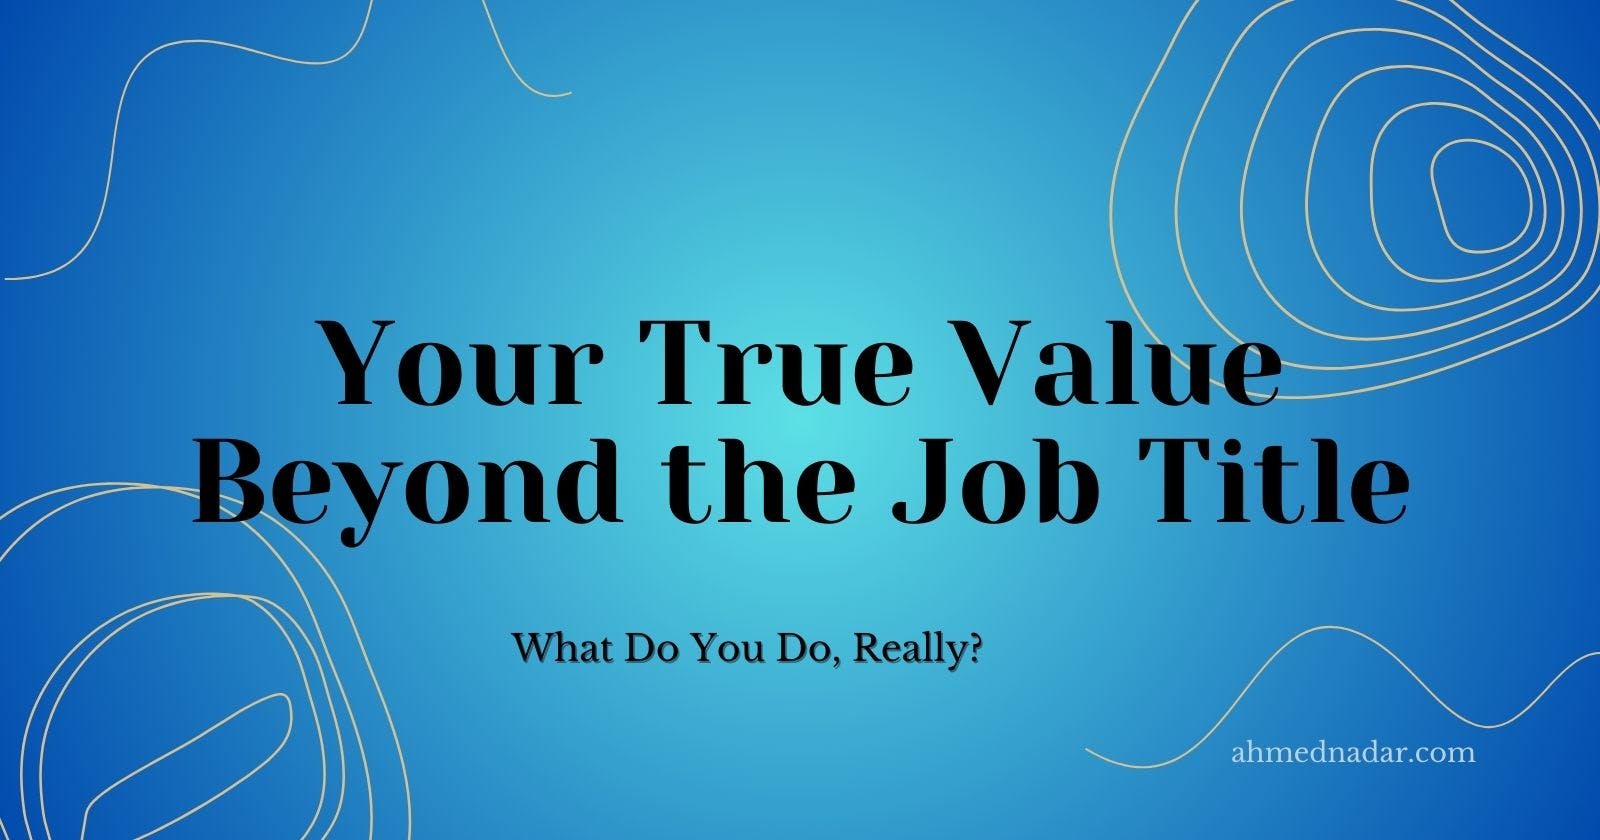 Your true value beyond the job title